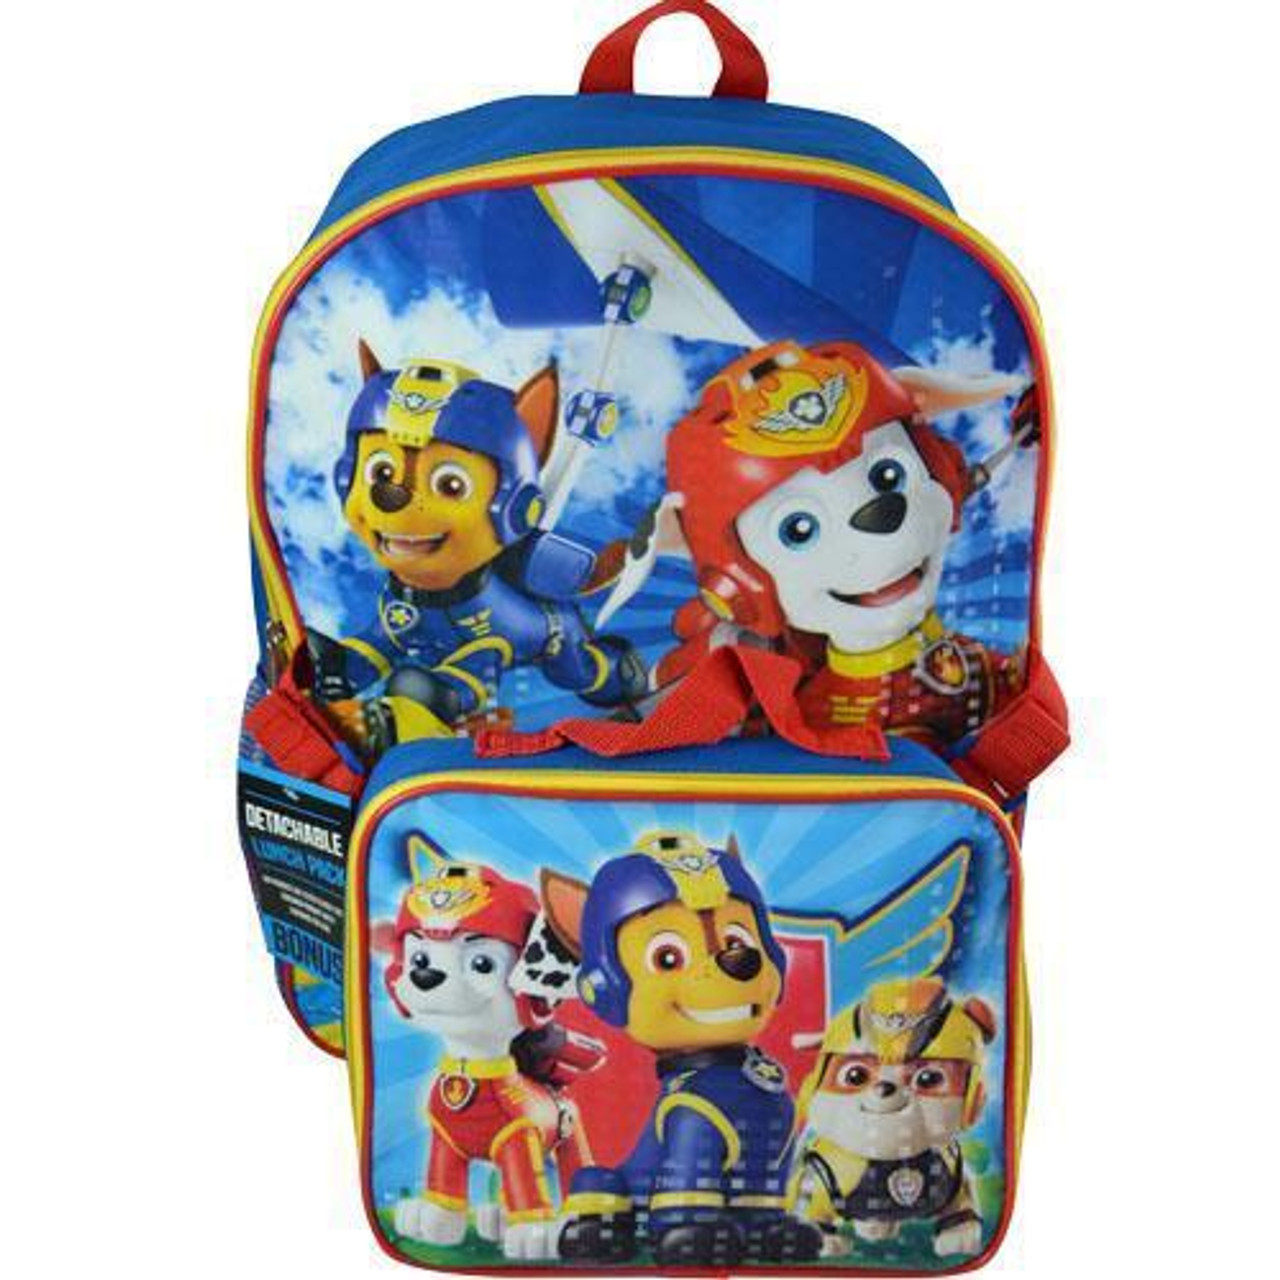 PAW PATROL BACKPACK WITH LUNCH KIT 16''